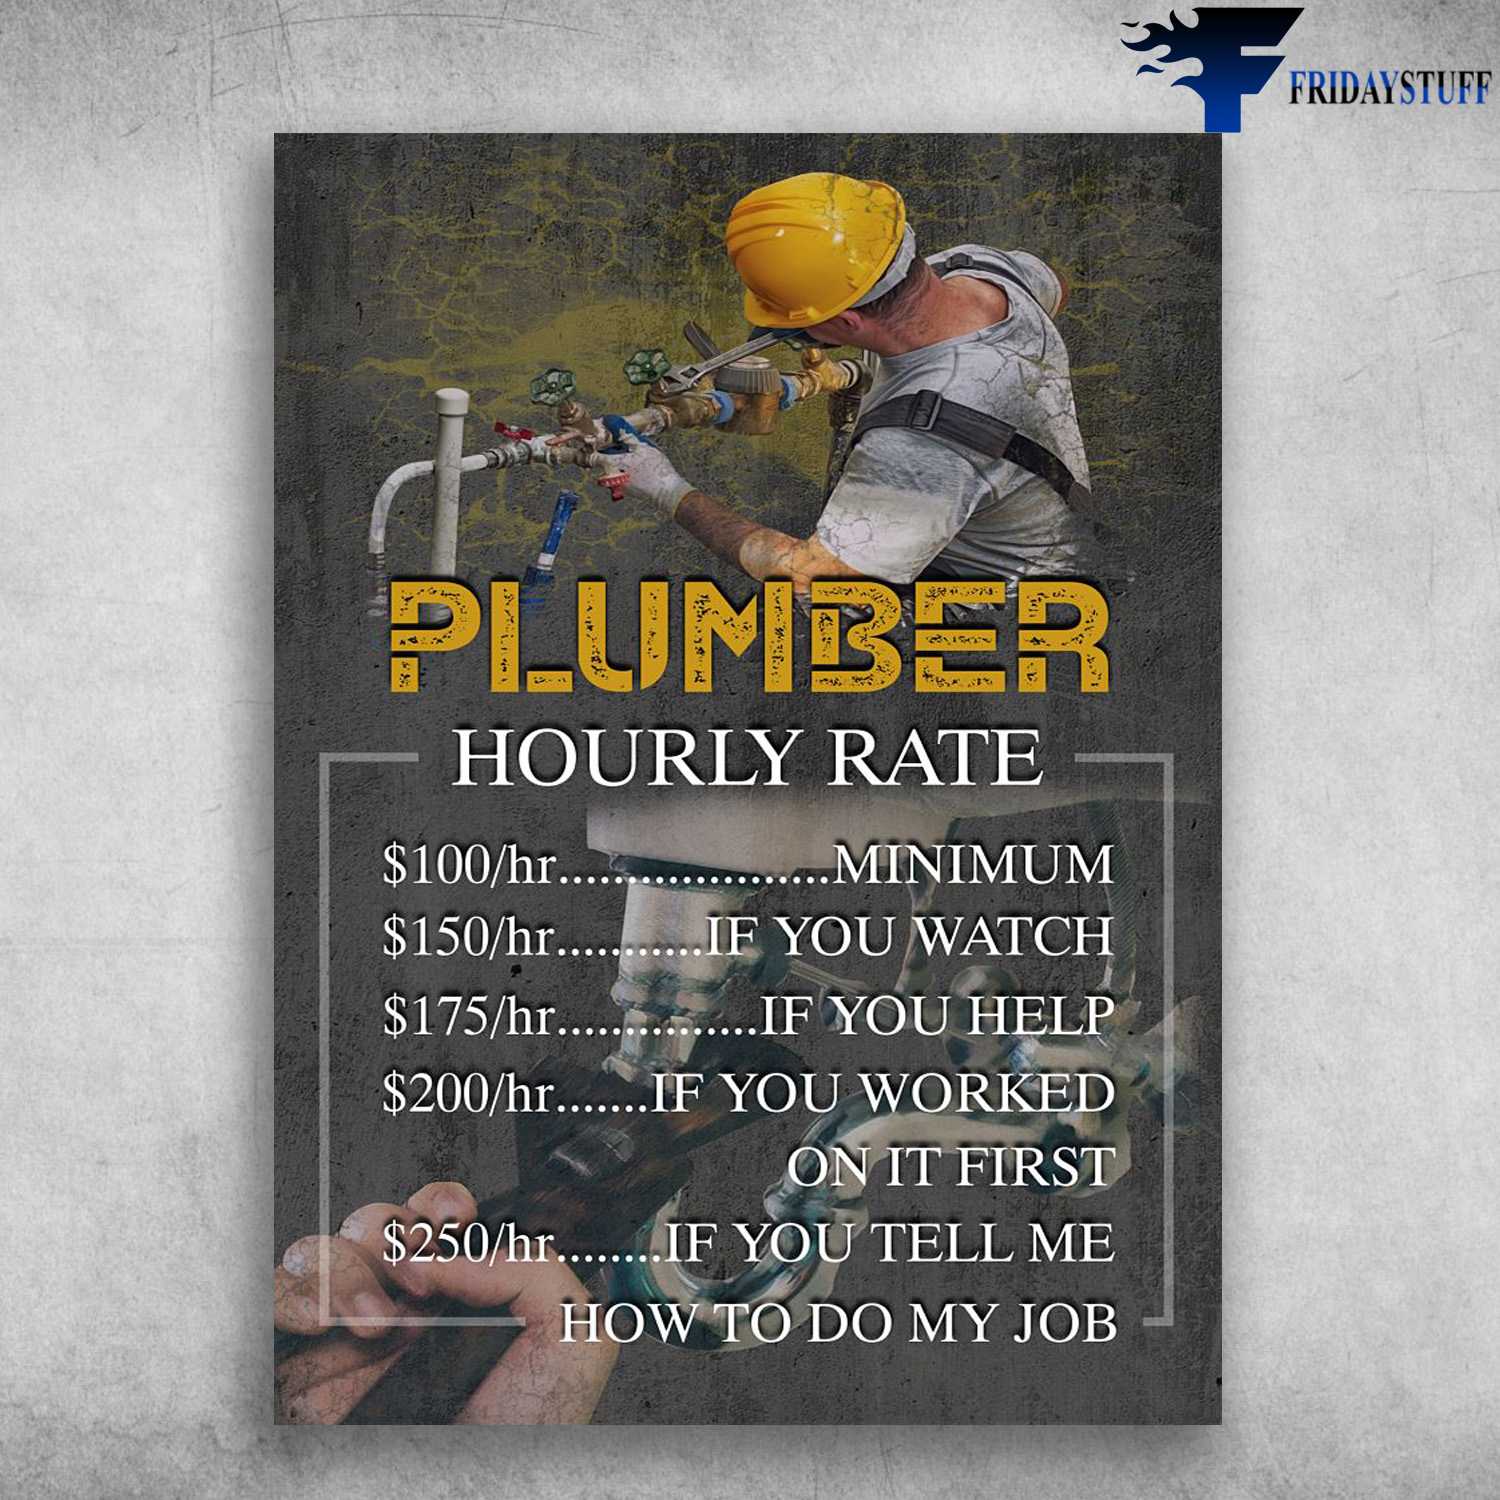 Plumber Poster - Hourly Rate, Minimum, If You Watch, If You Help, If You Worked On Is First, If You Tell Me How To Do My Job